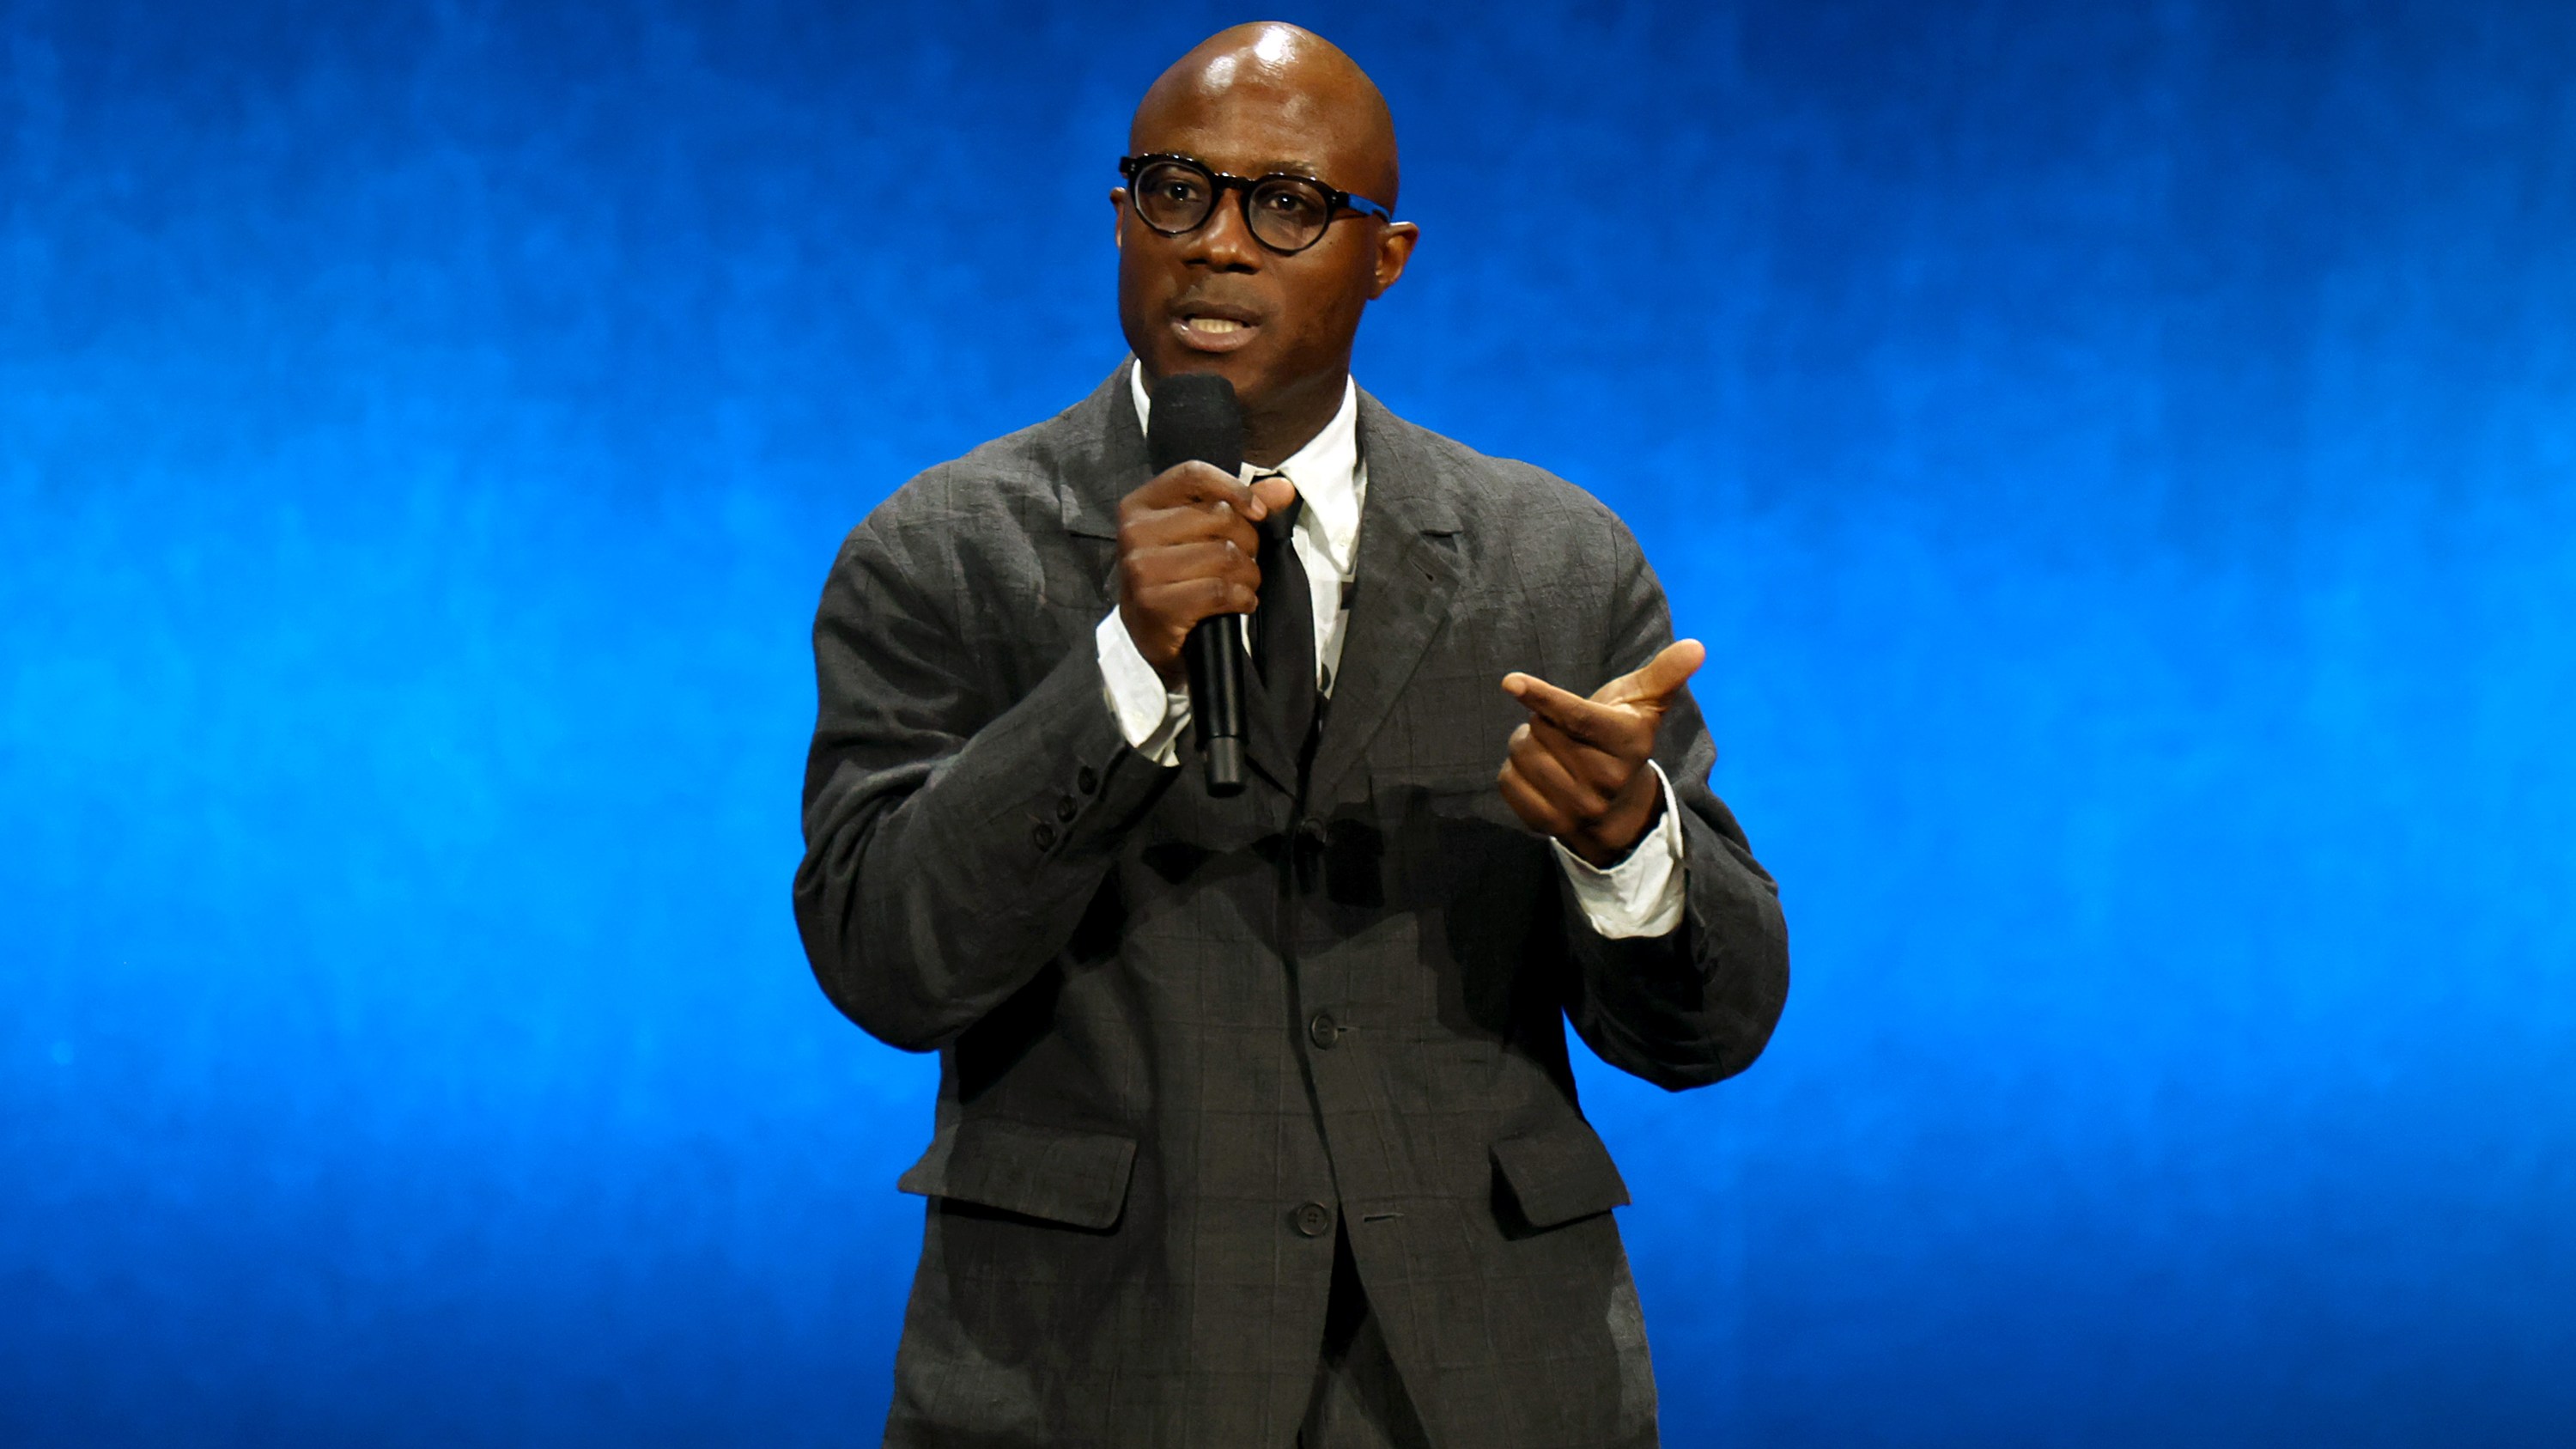 LAS VEGAS, NEVADA - APRIL 11: Barry Jenkins speaks onstage at the Walt Disney Studios Presentation during CinemaCon 2024 at The Colosseum at Caesars Palace on April 11, 2024 in Las Vegas, Nevada.  (Photo by Gabe Ginsberg/Getty Images)